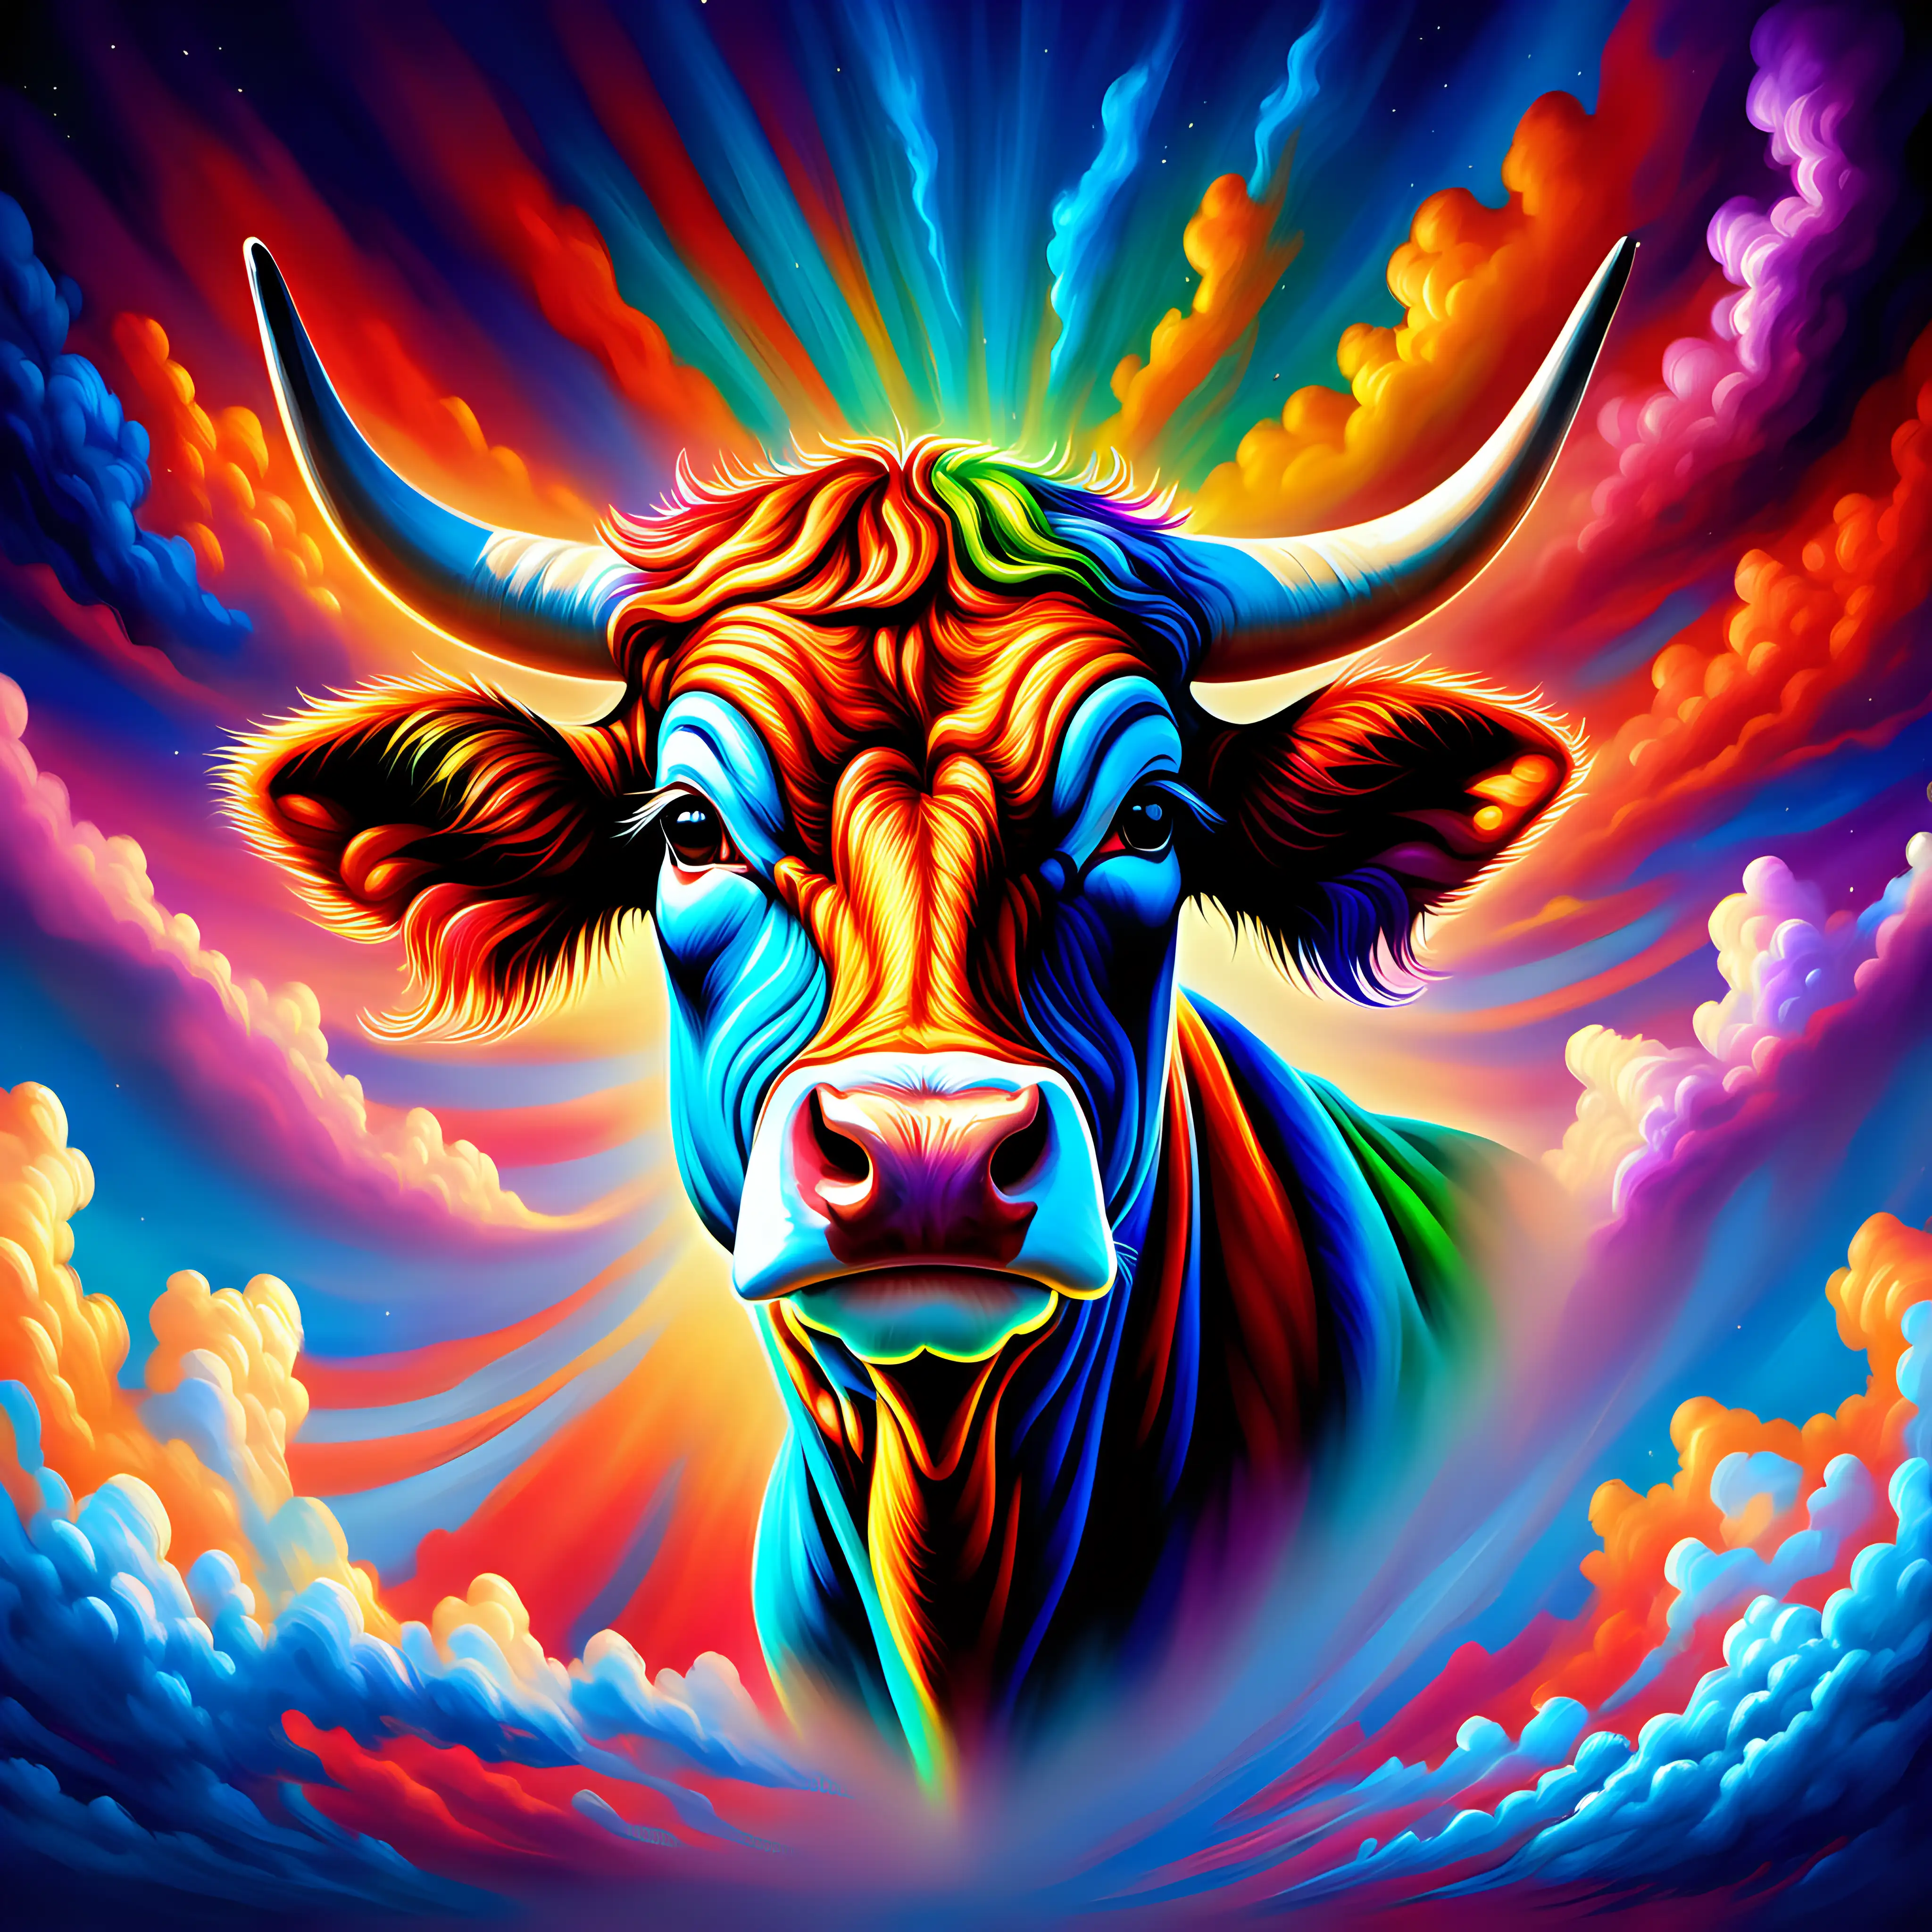 Imagine a breathtaking scene where a vibrant, multi-hued cow' head emerges from a canvas of swirling, iridescent clouds. The cow's head form is vividly painted with a palette of vibrant colors, emanating an aura of raw power and strength amidst the ever-shifting, kaleidoscopic clouds that surround it. Capture the essence of this majestic creature as it stands as a symbol of primal force and beauty within the mesmerizing, colorful expanse of the sky.